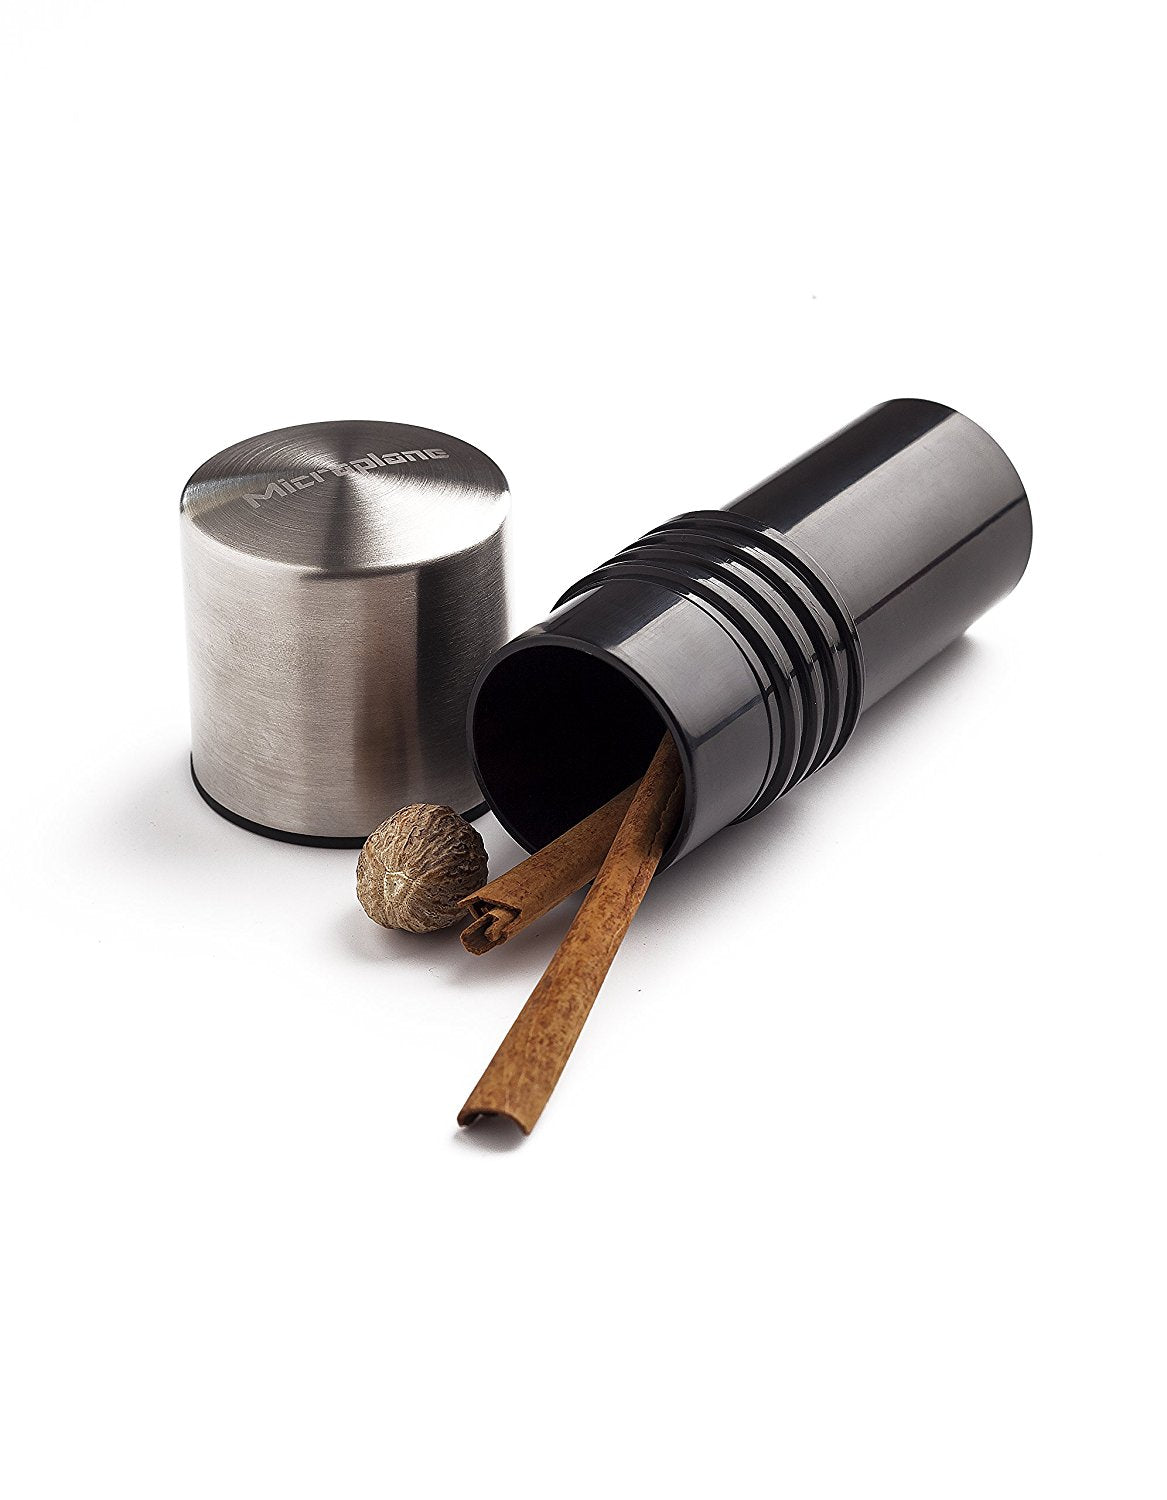 Microplane spice mill, steel